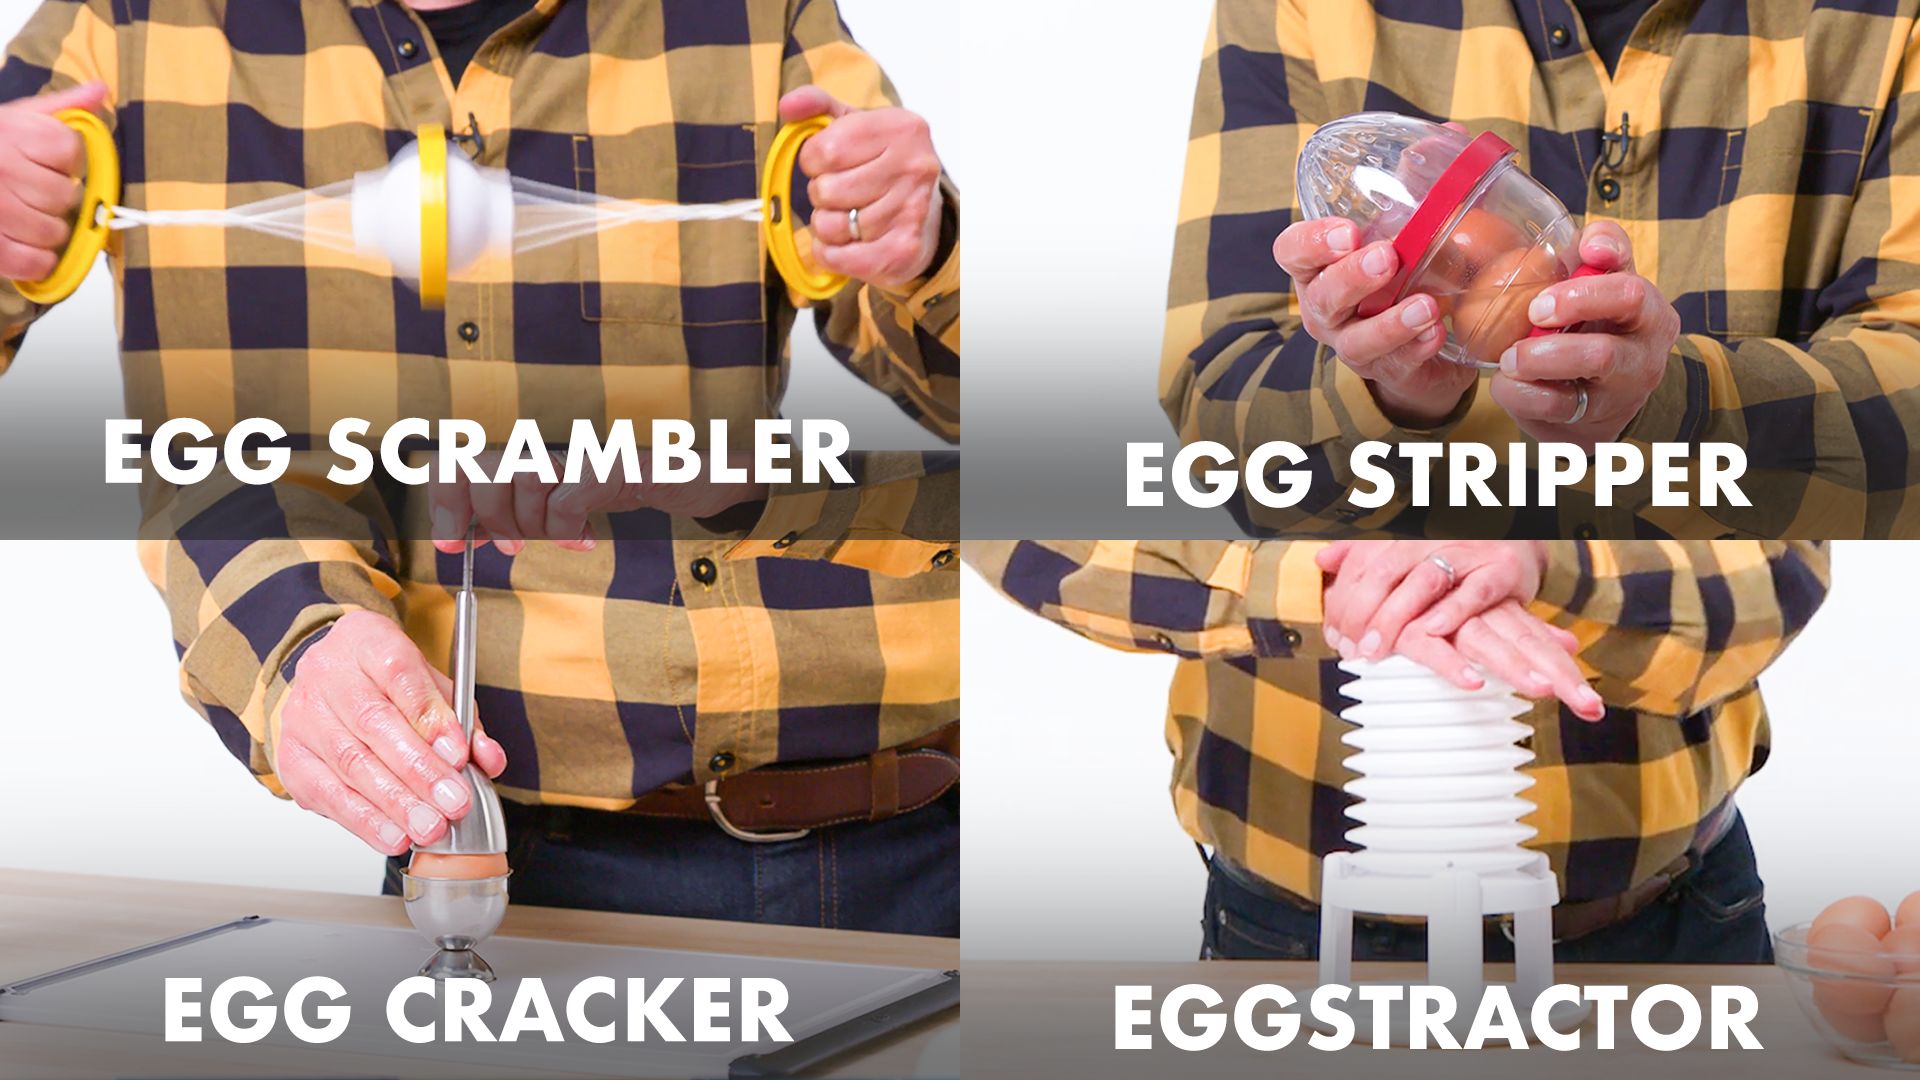 5 Nut-Cracking Gadgets Tested By Design Expert